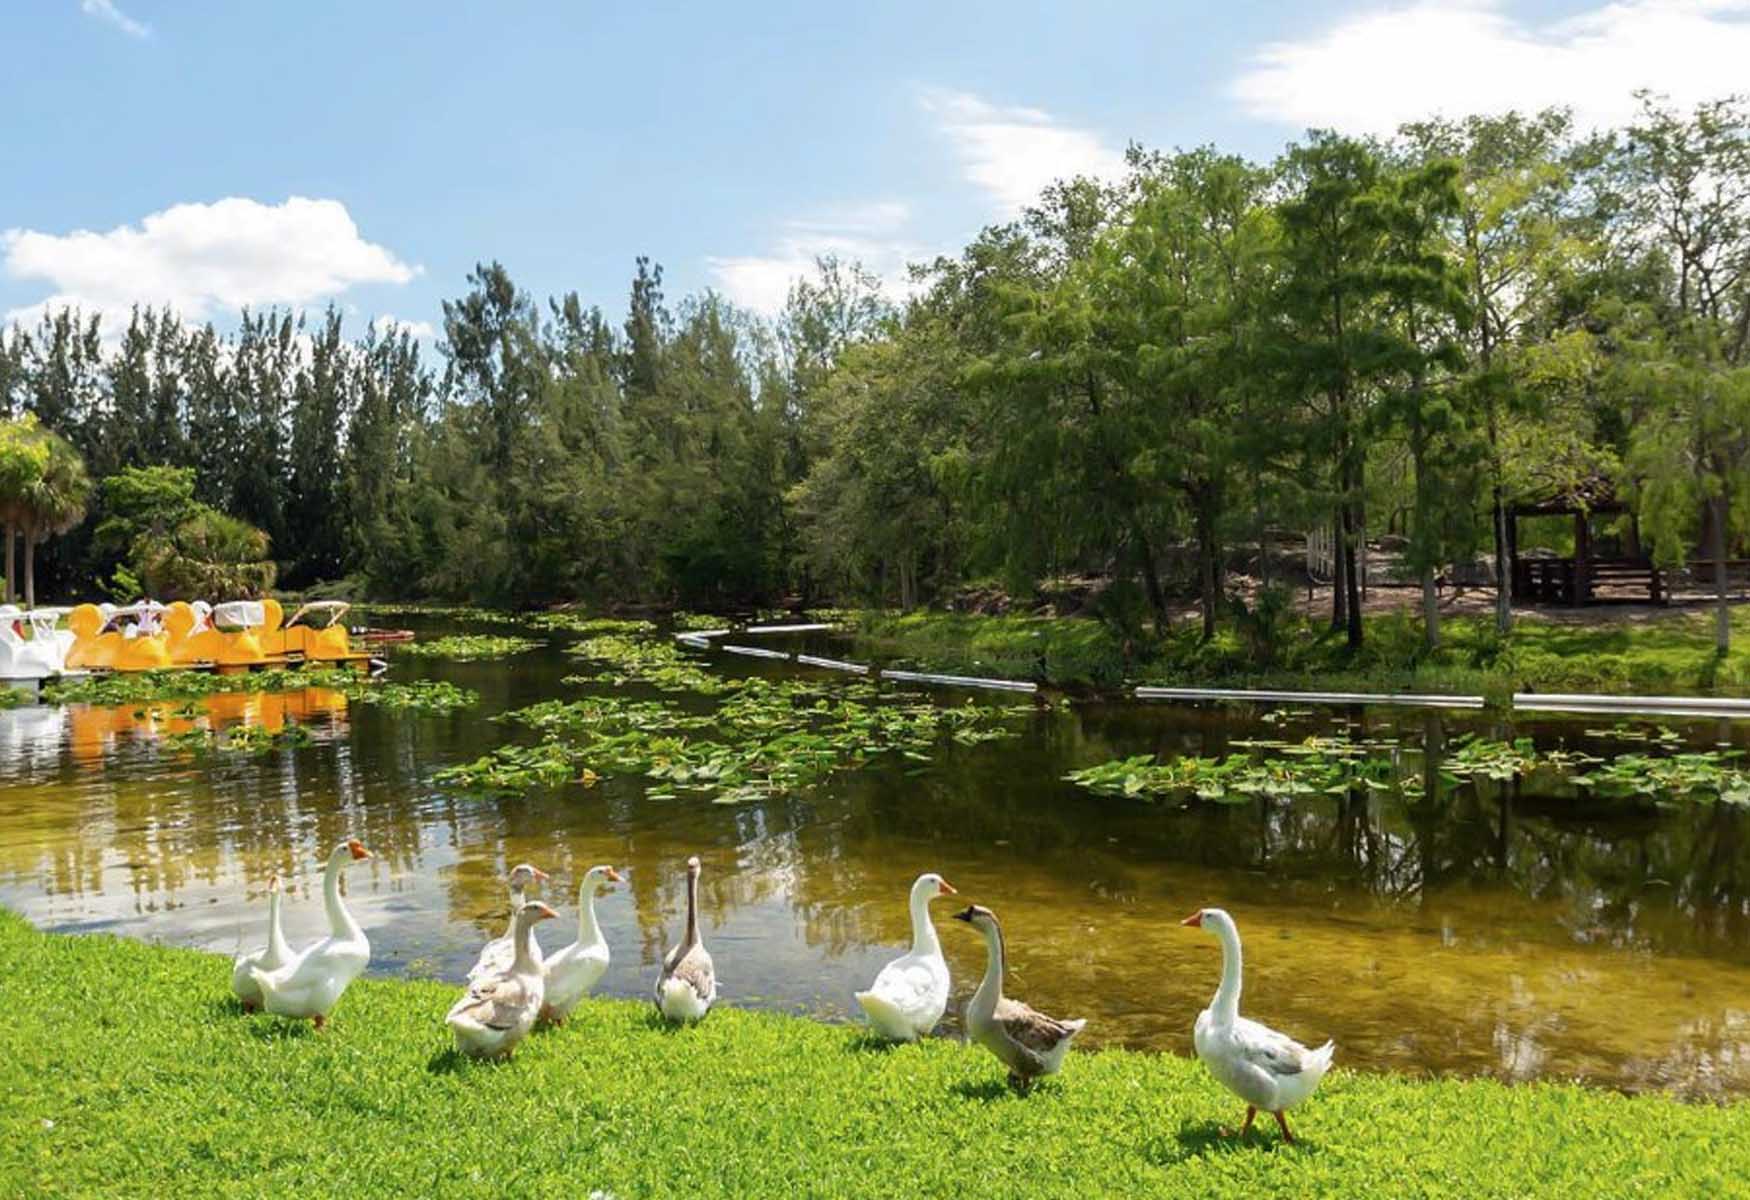 9-facts-about-local-wildlife-and-natural-reserves-in-hialeah-florida